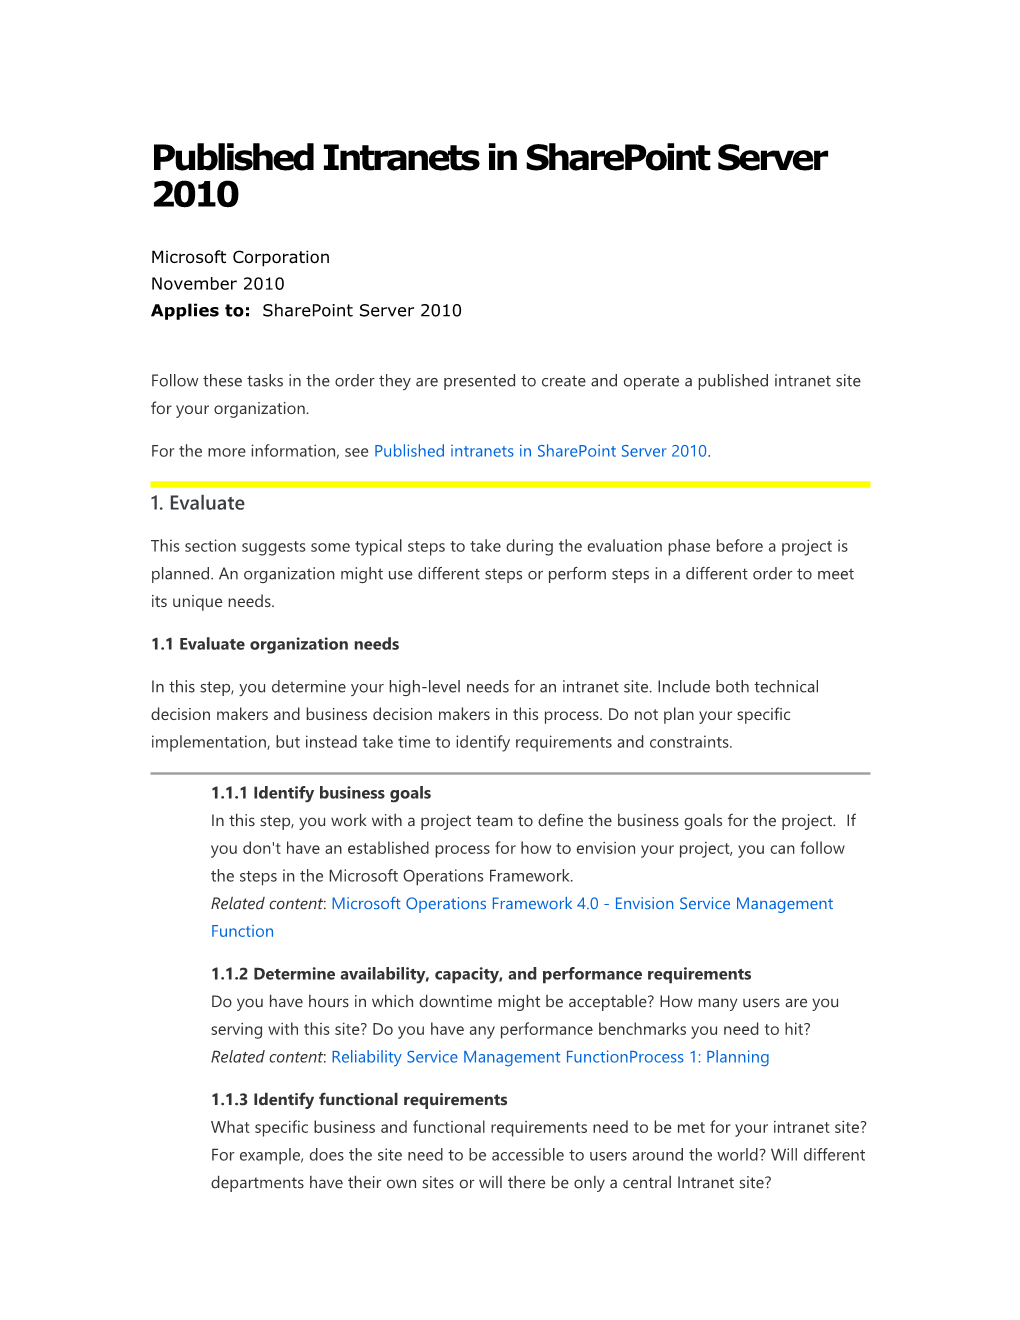 Published Intranets in Sharepoint Server 2010